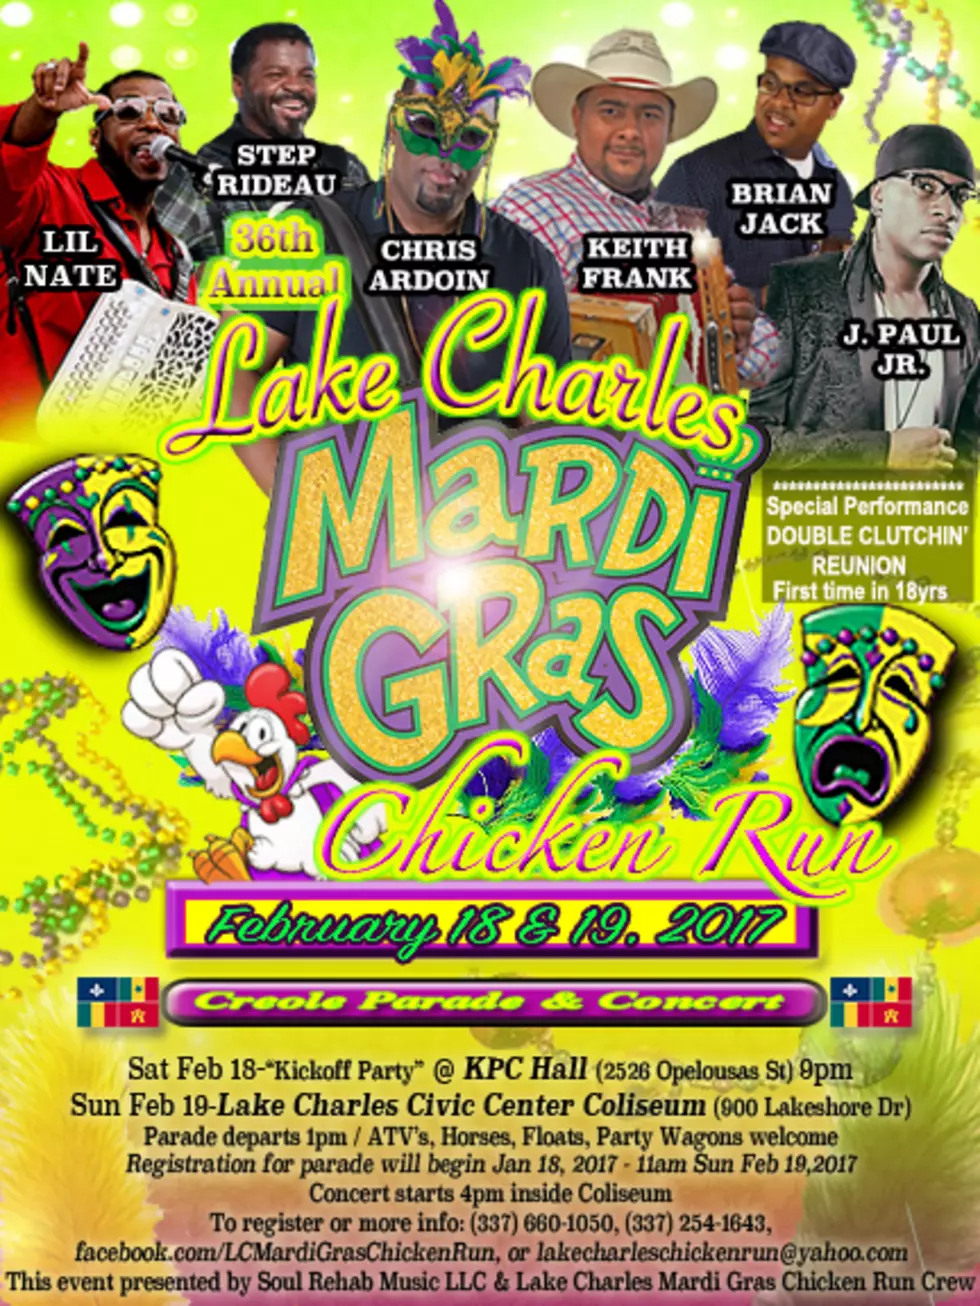 The 36th Annual Lake Charles Mardi Gras Chicken Run Is This Weekend [PICTURE]